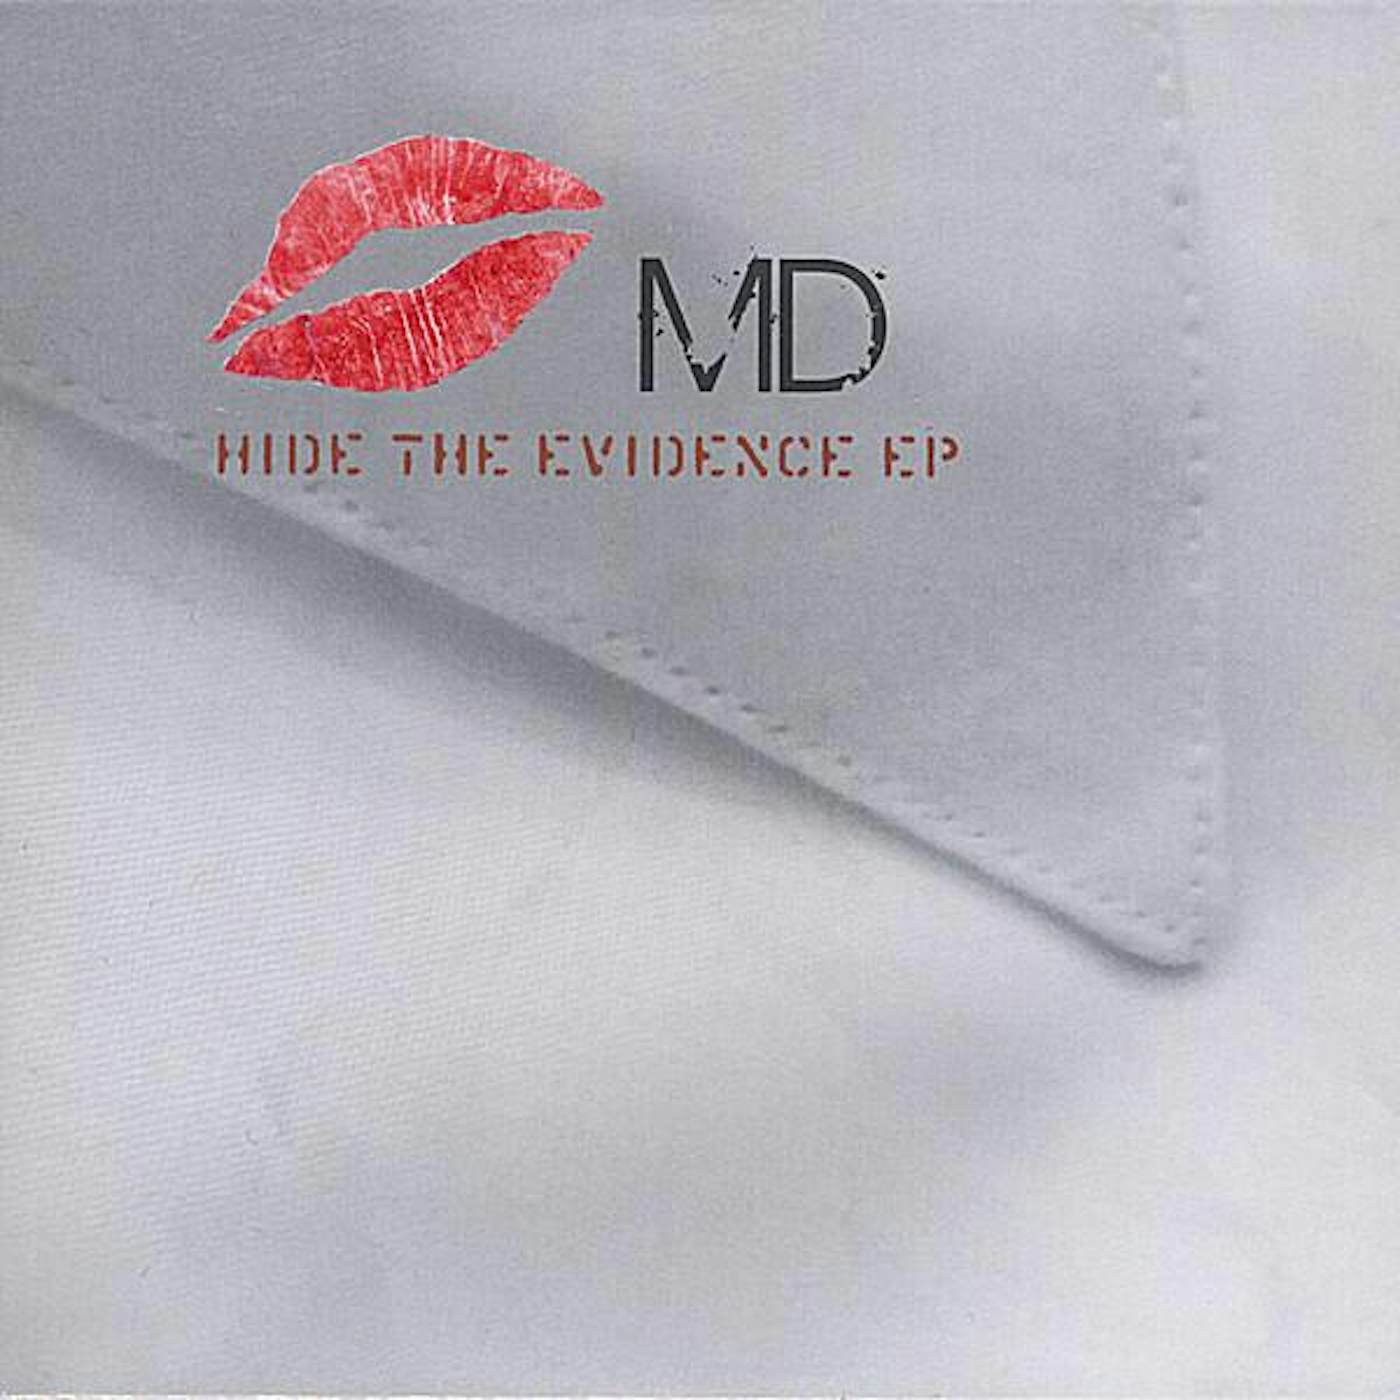 MD HIDE THE EVIDENCE EP CD